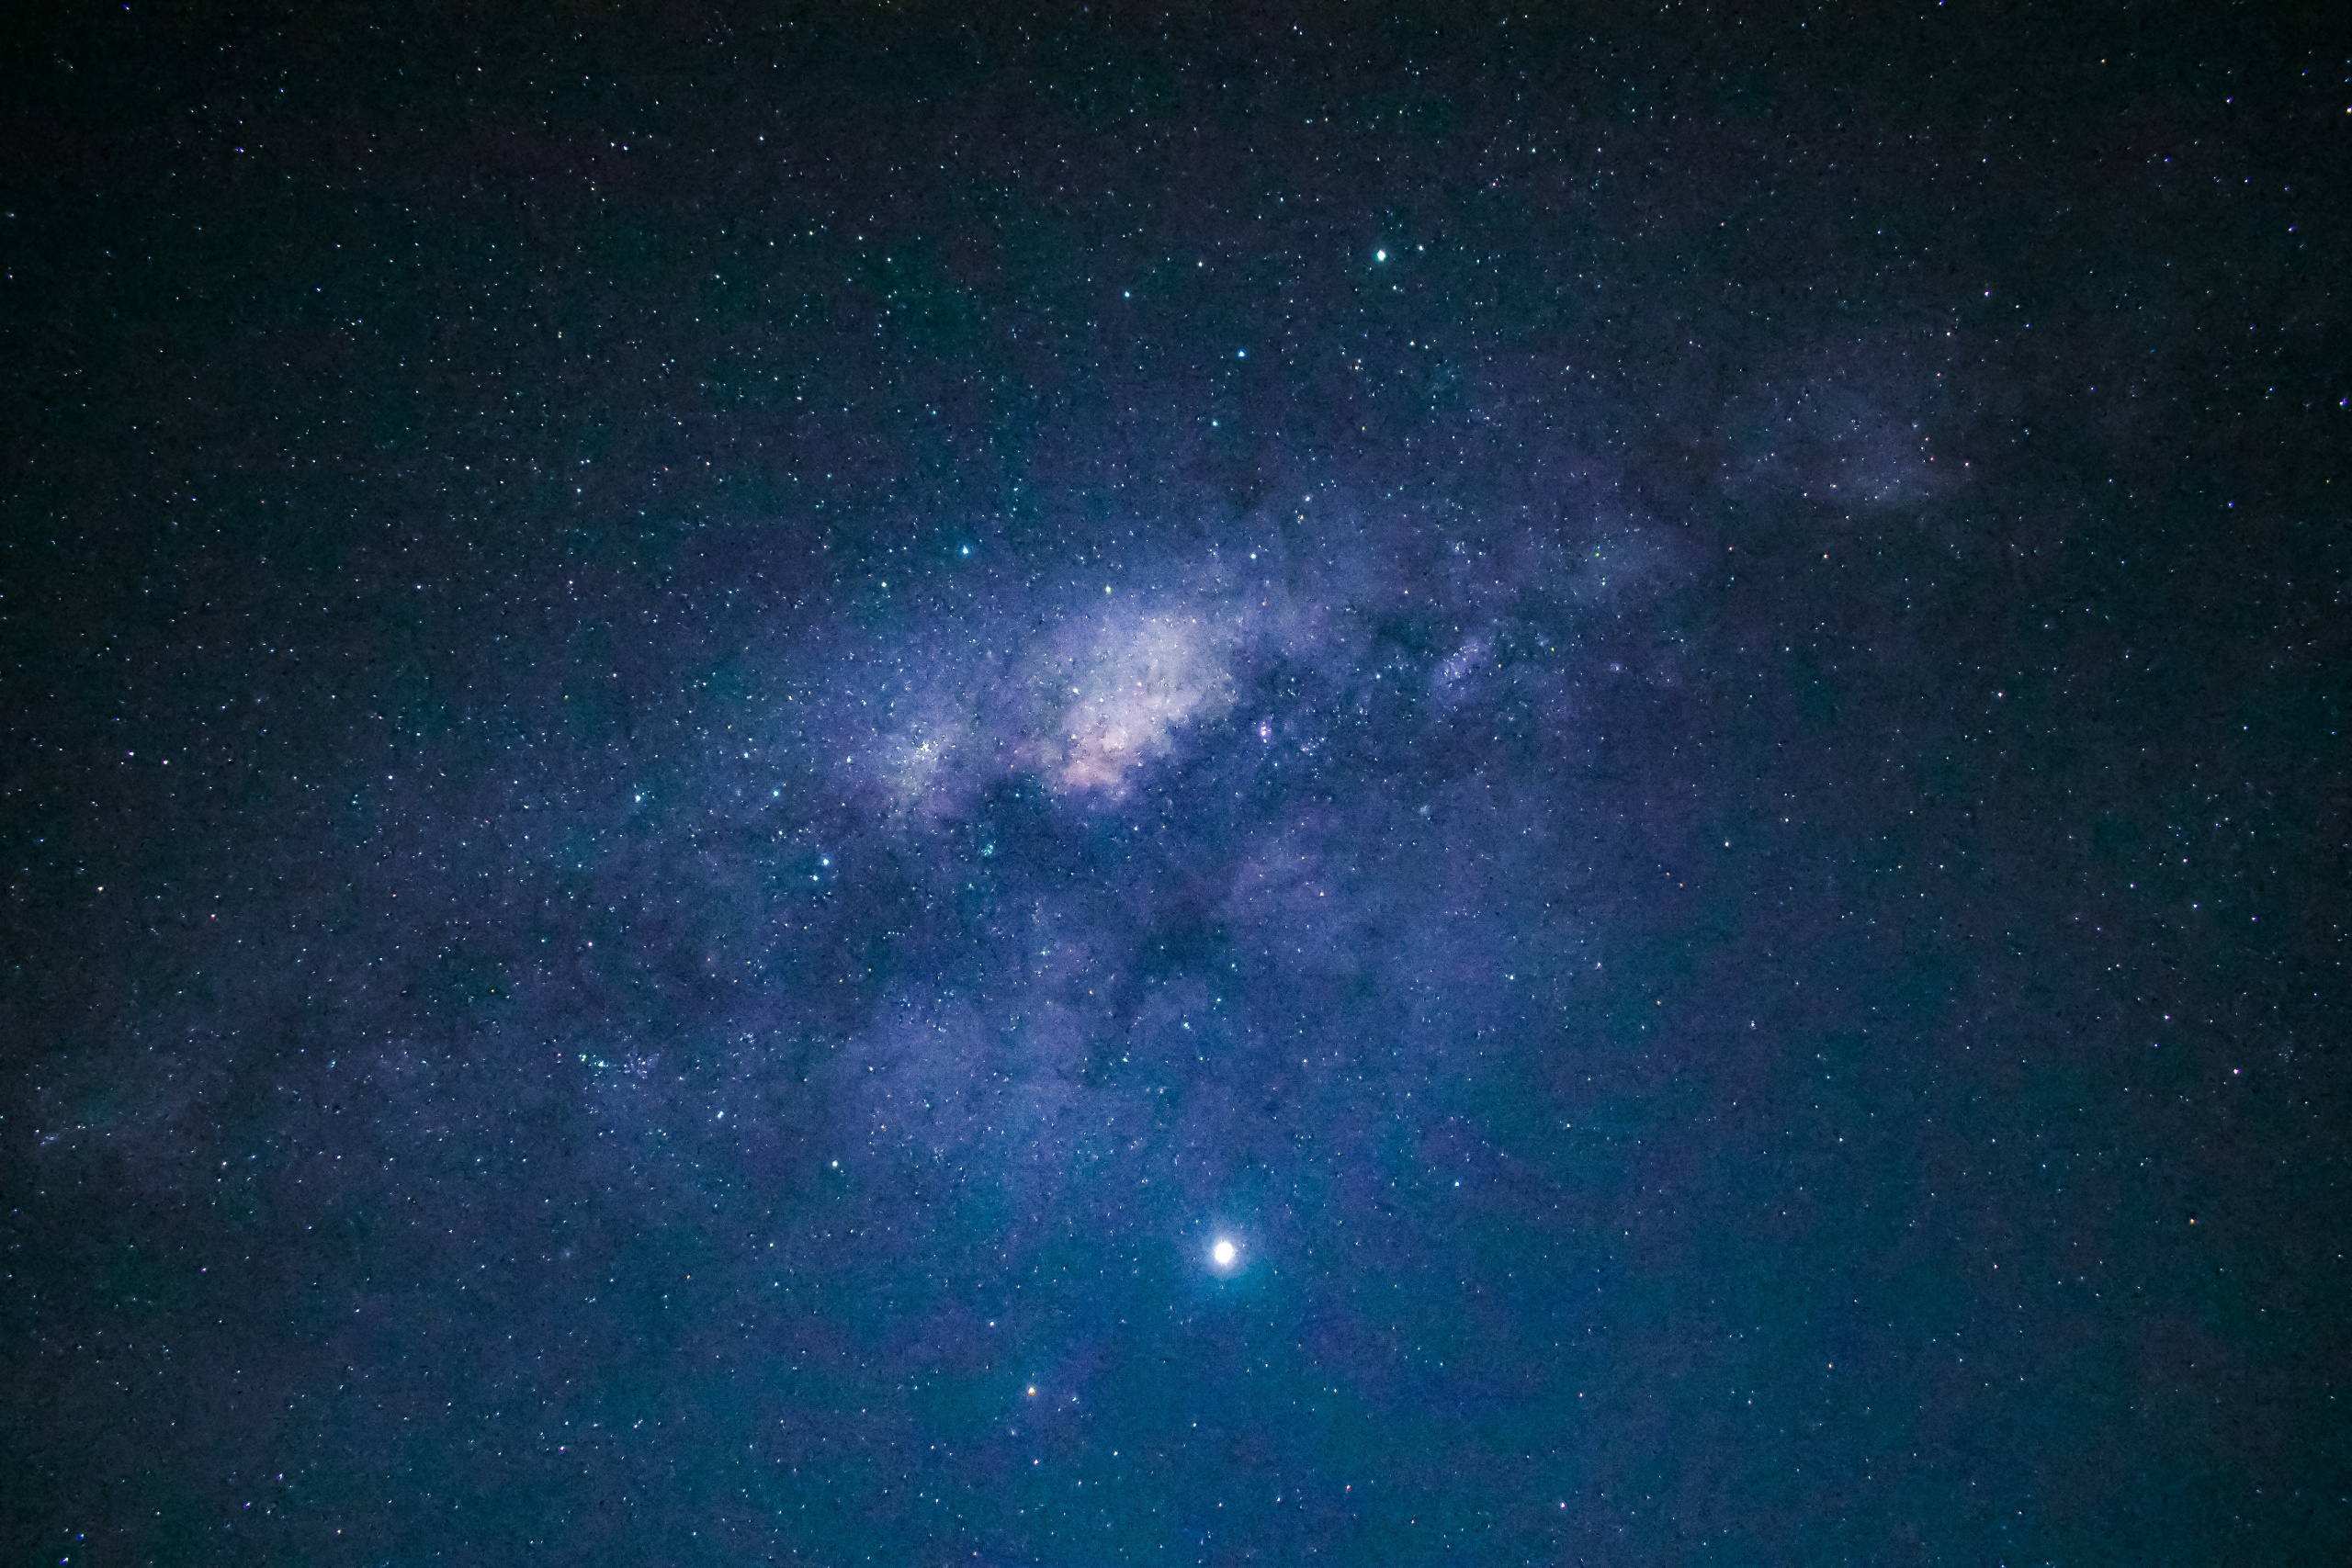 "Instead of connecting stars to sketch constellations, the spaces between join to form the whole, an 'ecological matrix' where we sought coherence and understanding" - Dr Loyola McLean at RANZCP2022. Photo by Nicole Avagliano on Pexels.